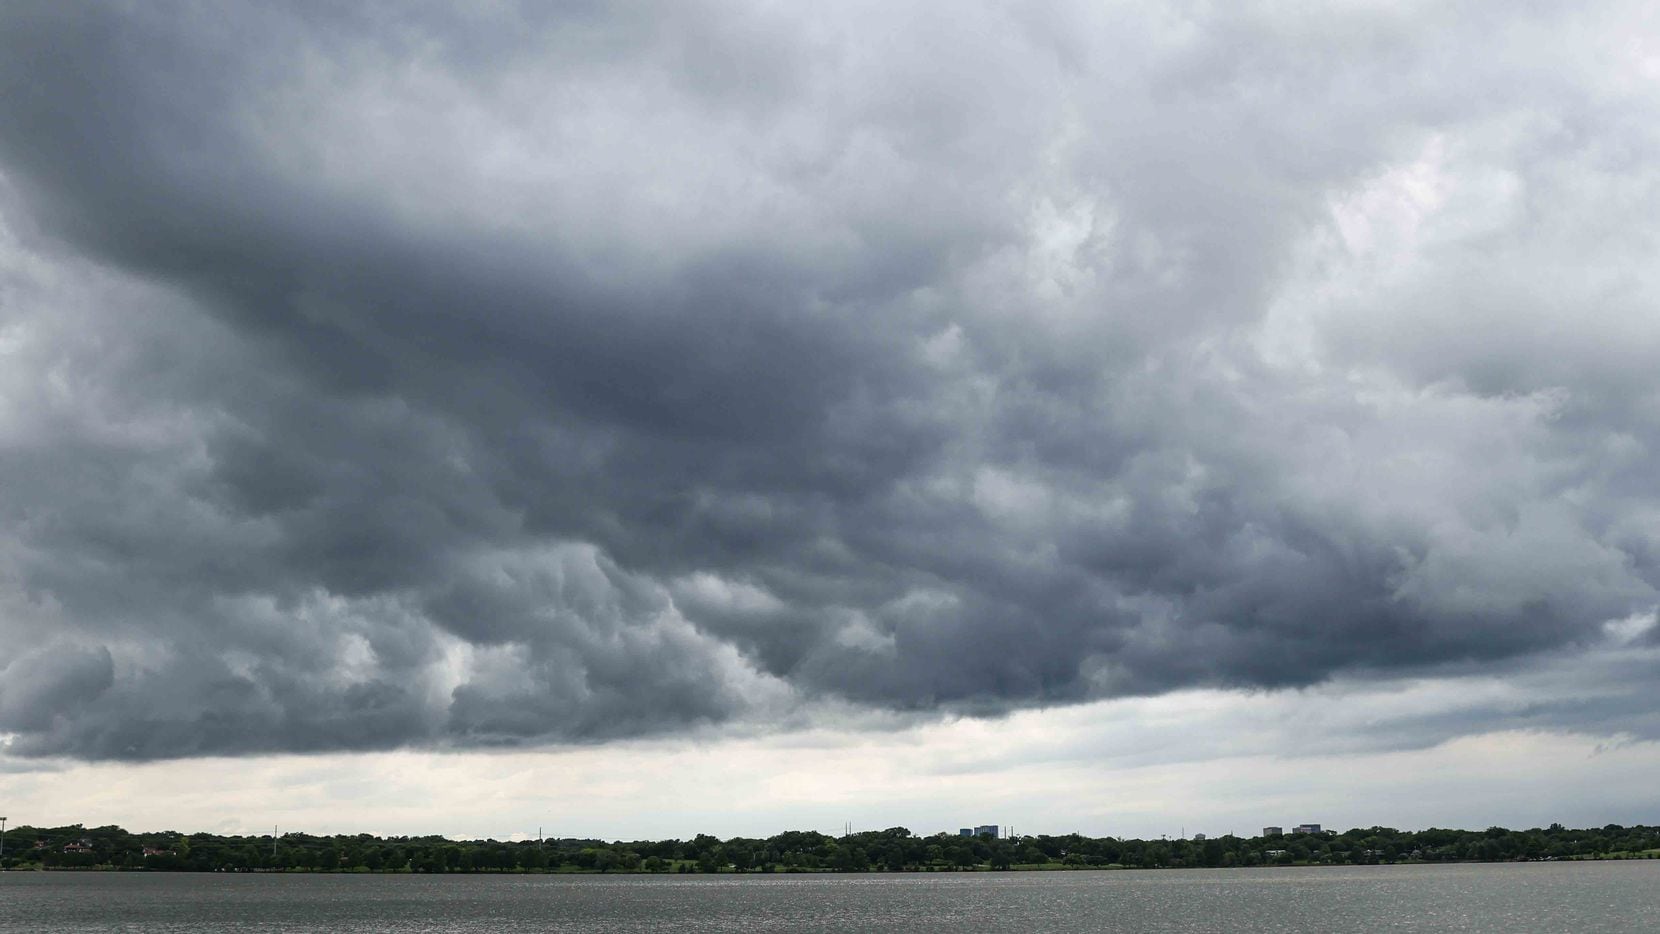 Rainy day over White Rock Lake in Dallas on Monday, May 24, 2021.